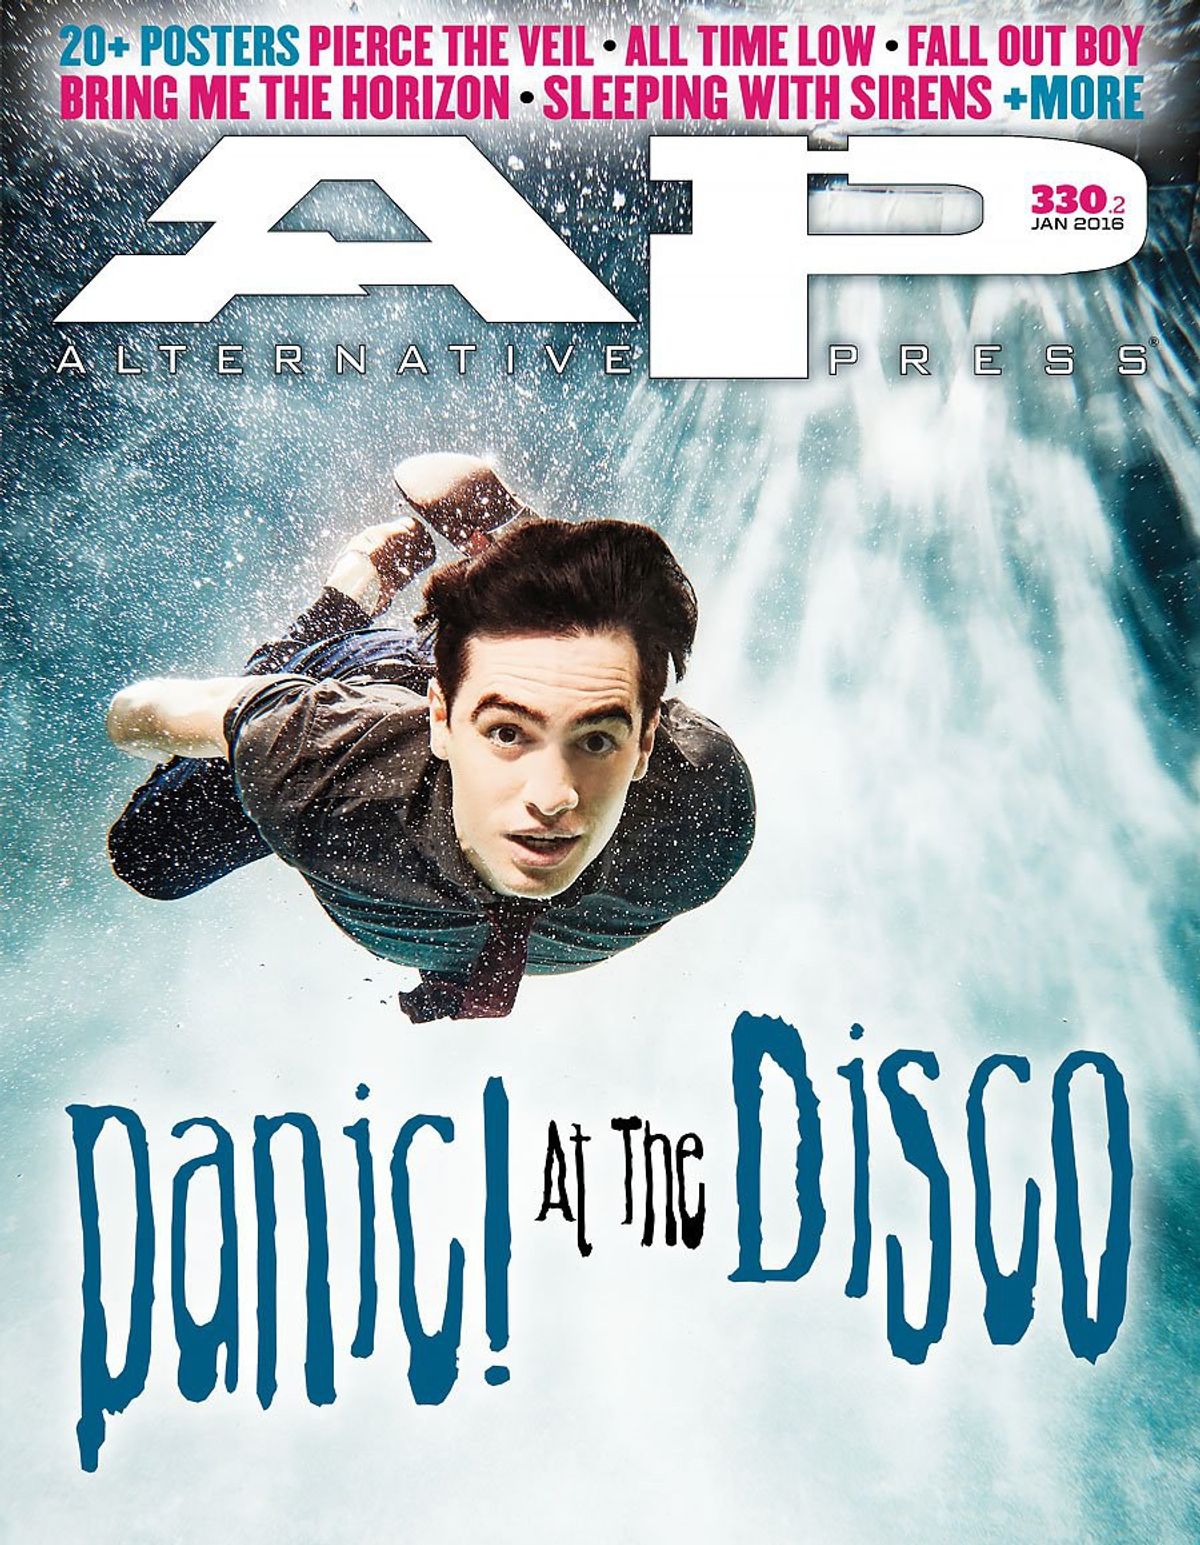 The Musician's Institute Interview of Panic! at the Disco's Brendon Urie